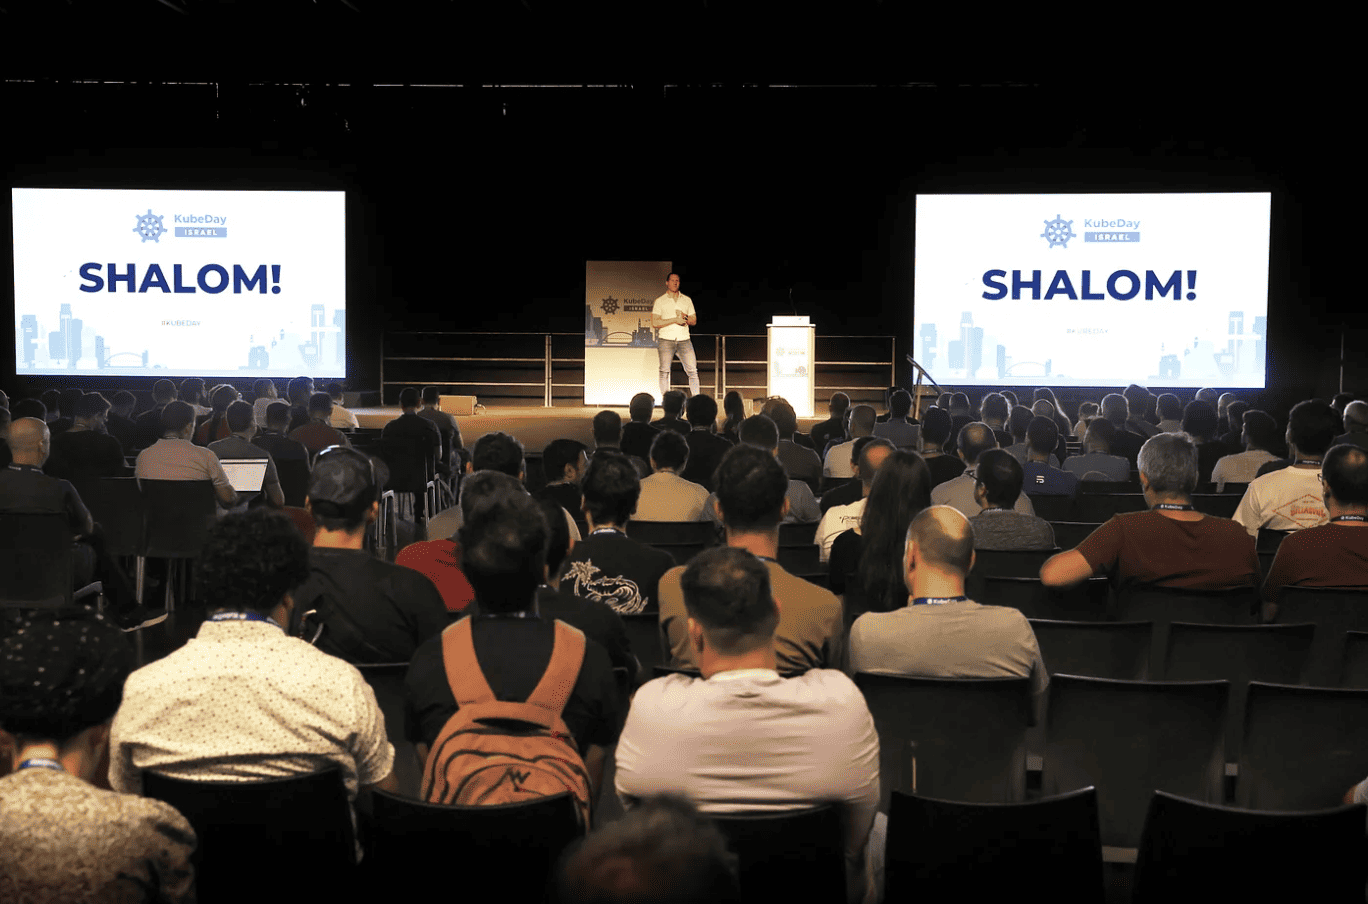 A gentleman talking on the stage on KubeDay Israel with 2 projectors saying "Shalom"